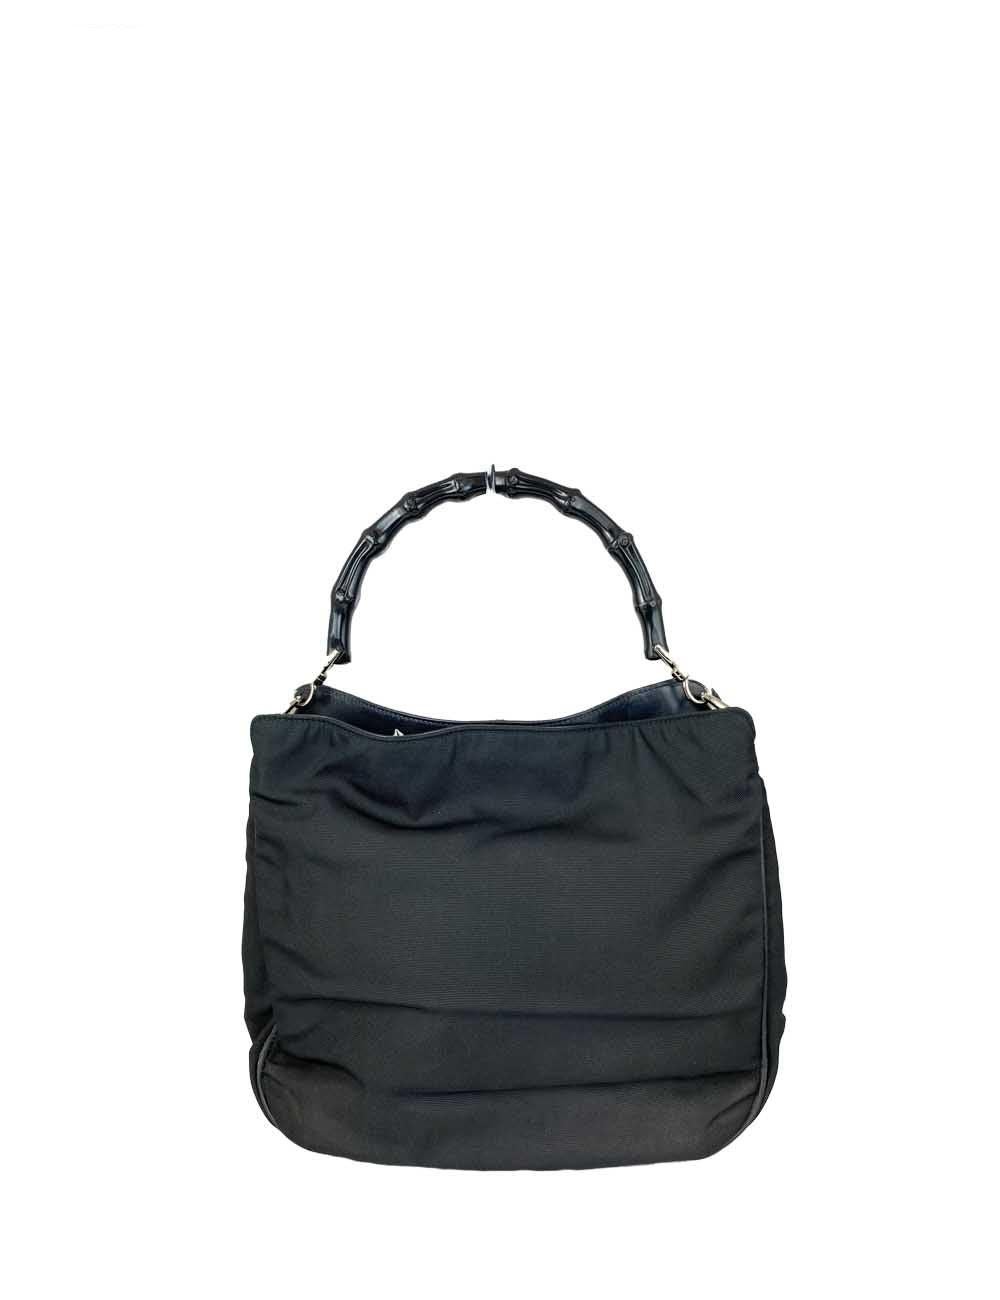 Gucci Black Nylon Handle Bag with Black Bamboo In Good Condition For Sale In Amman, JO